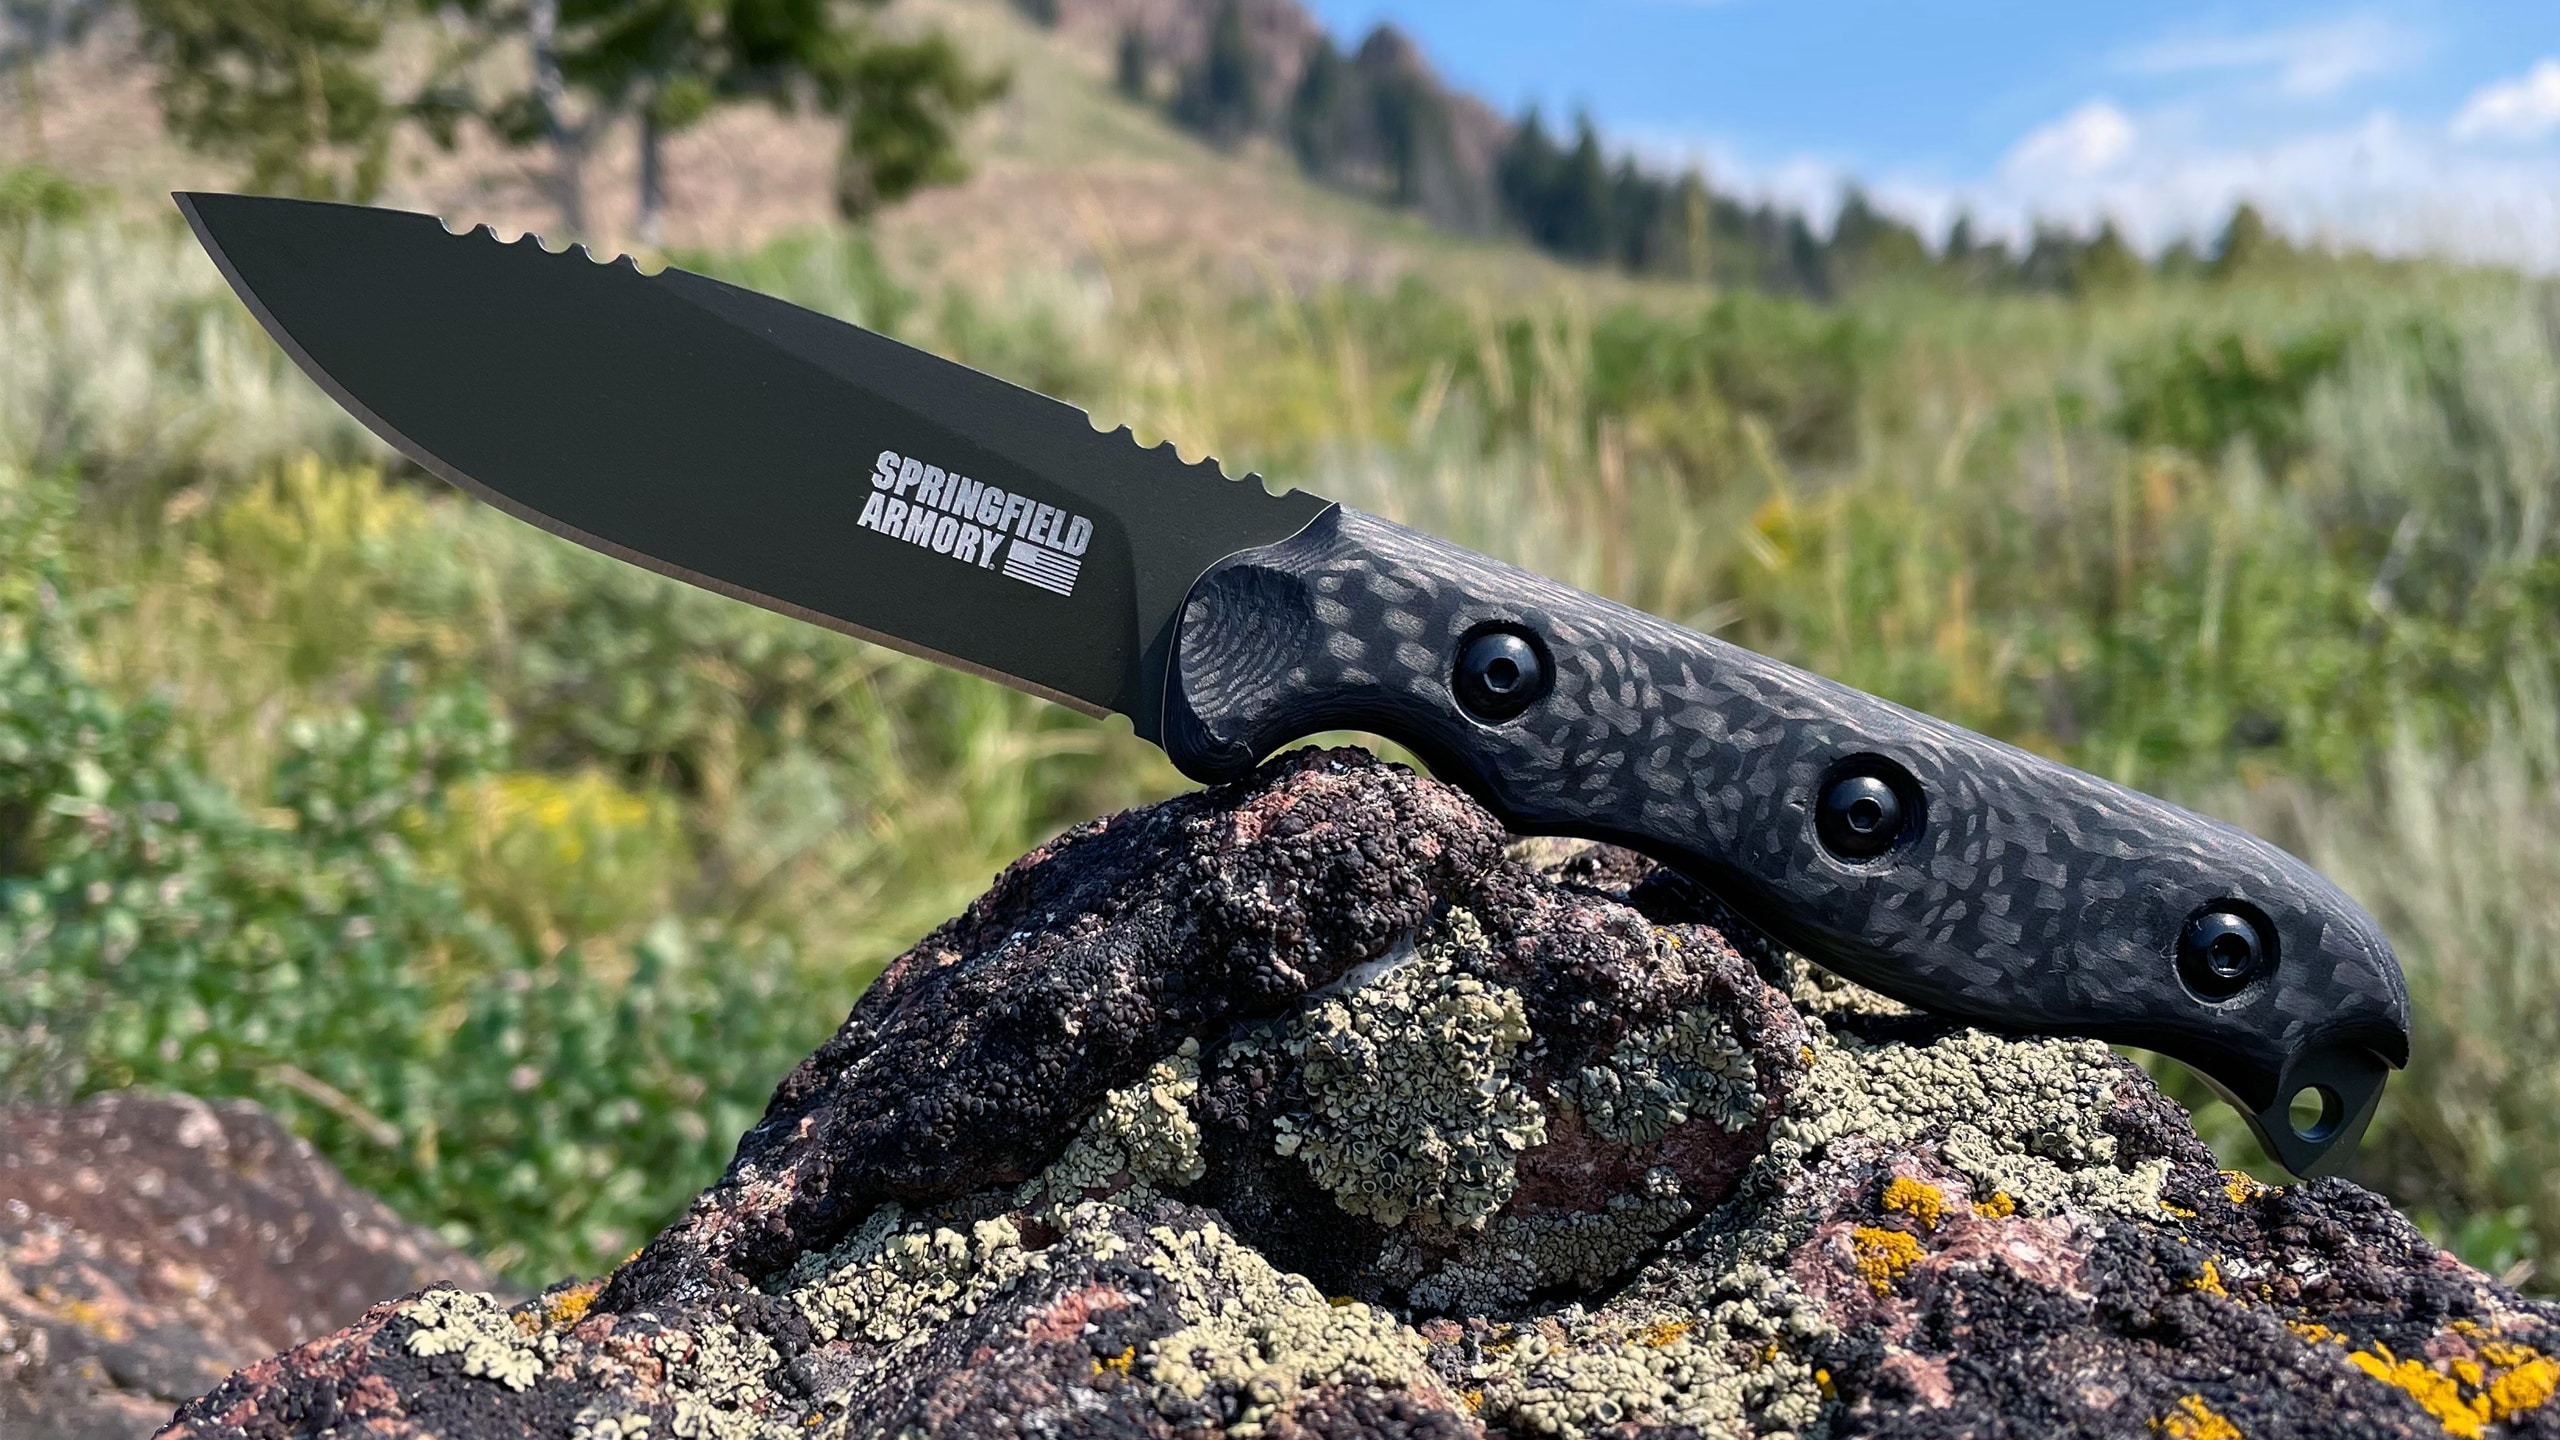 https://www.thearmorylife.com/wp-content/uploads/2022/09/Springfield-Armory-knife-review.jpg